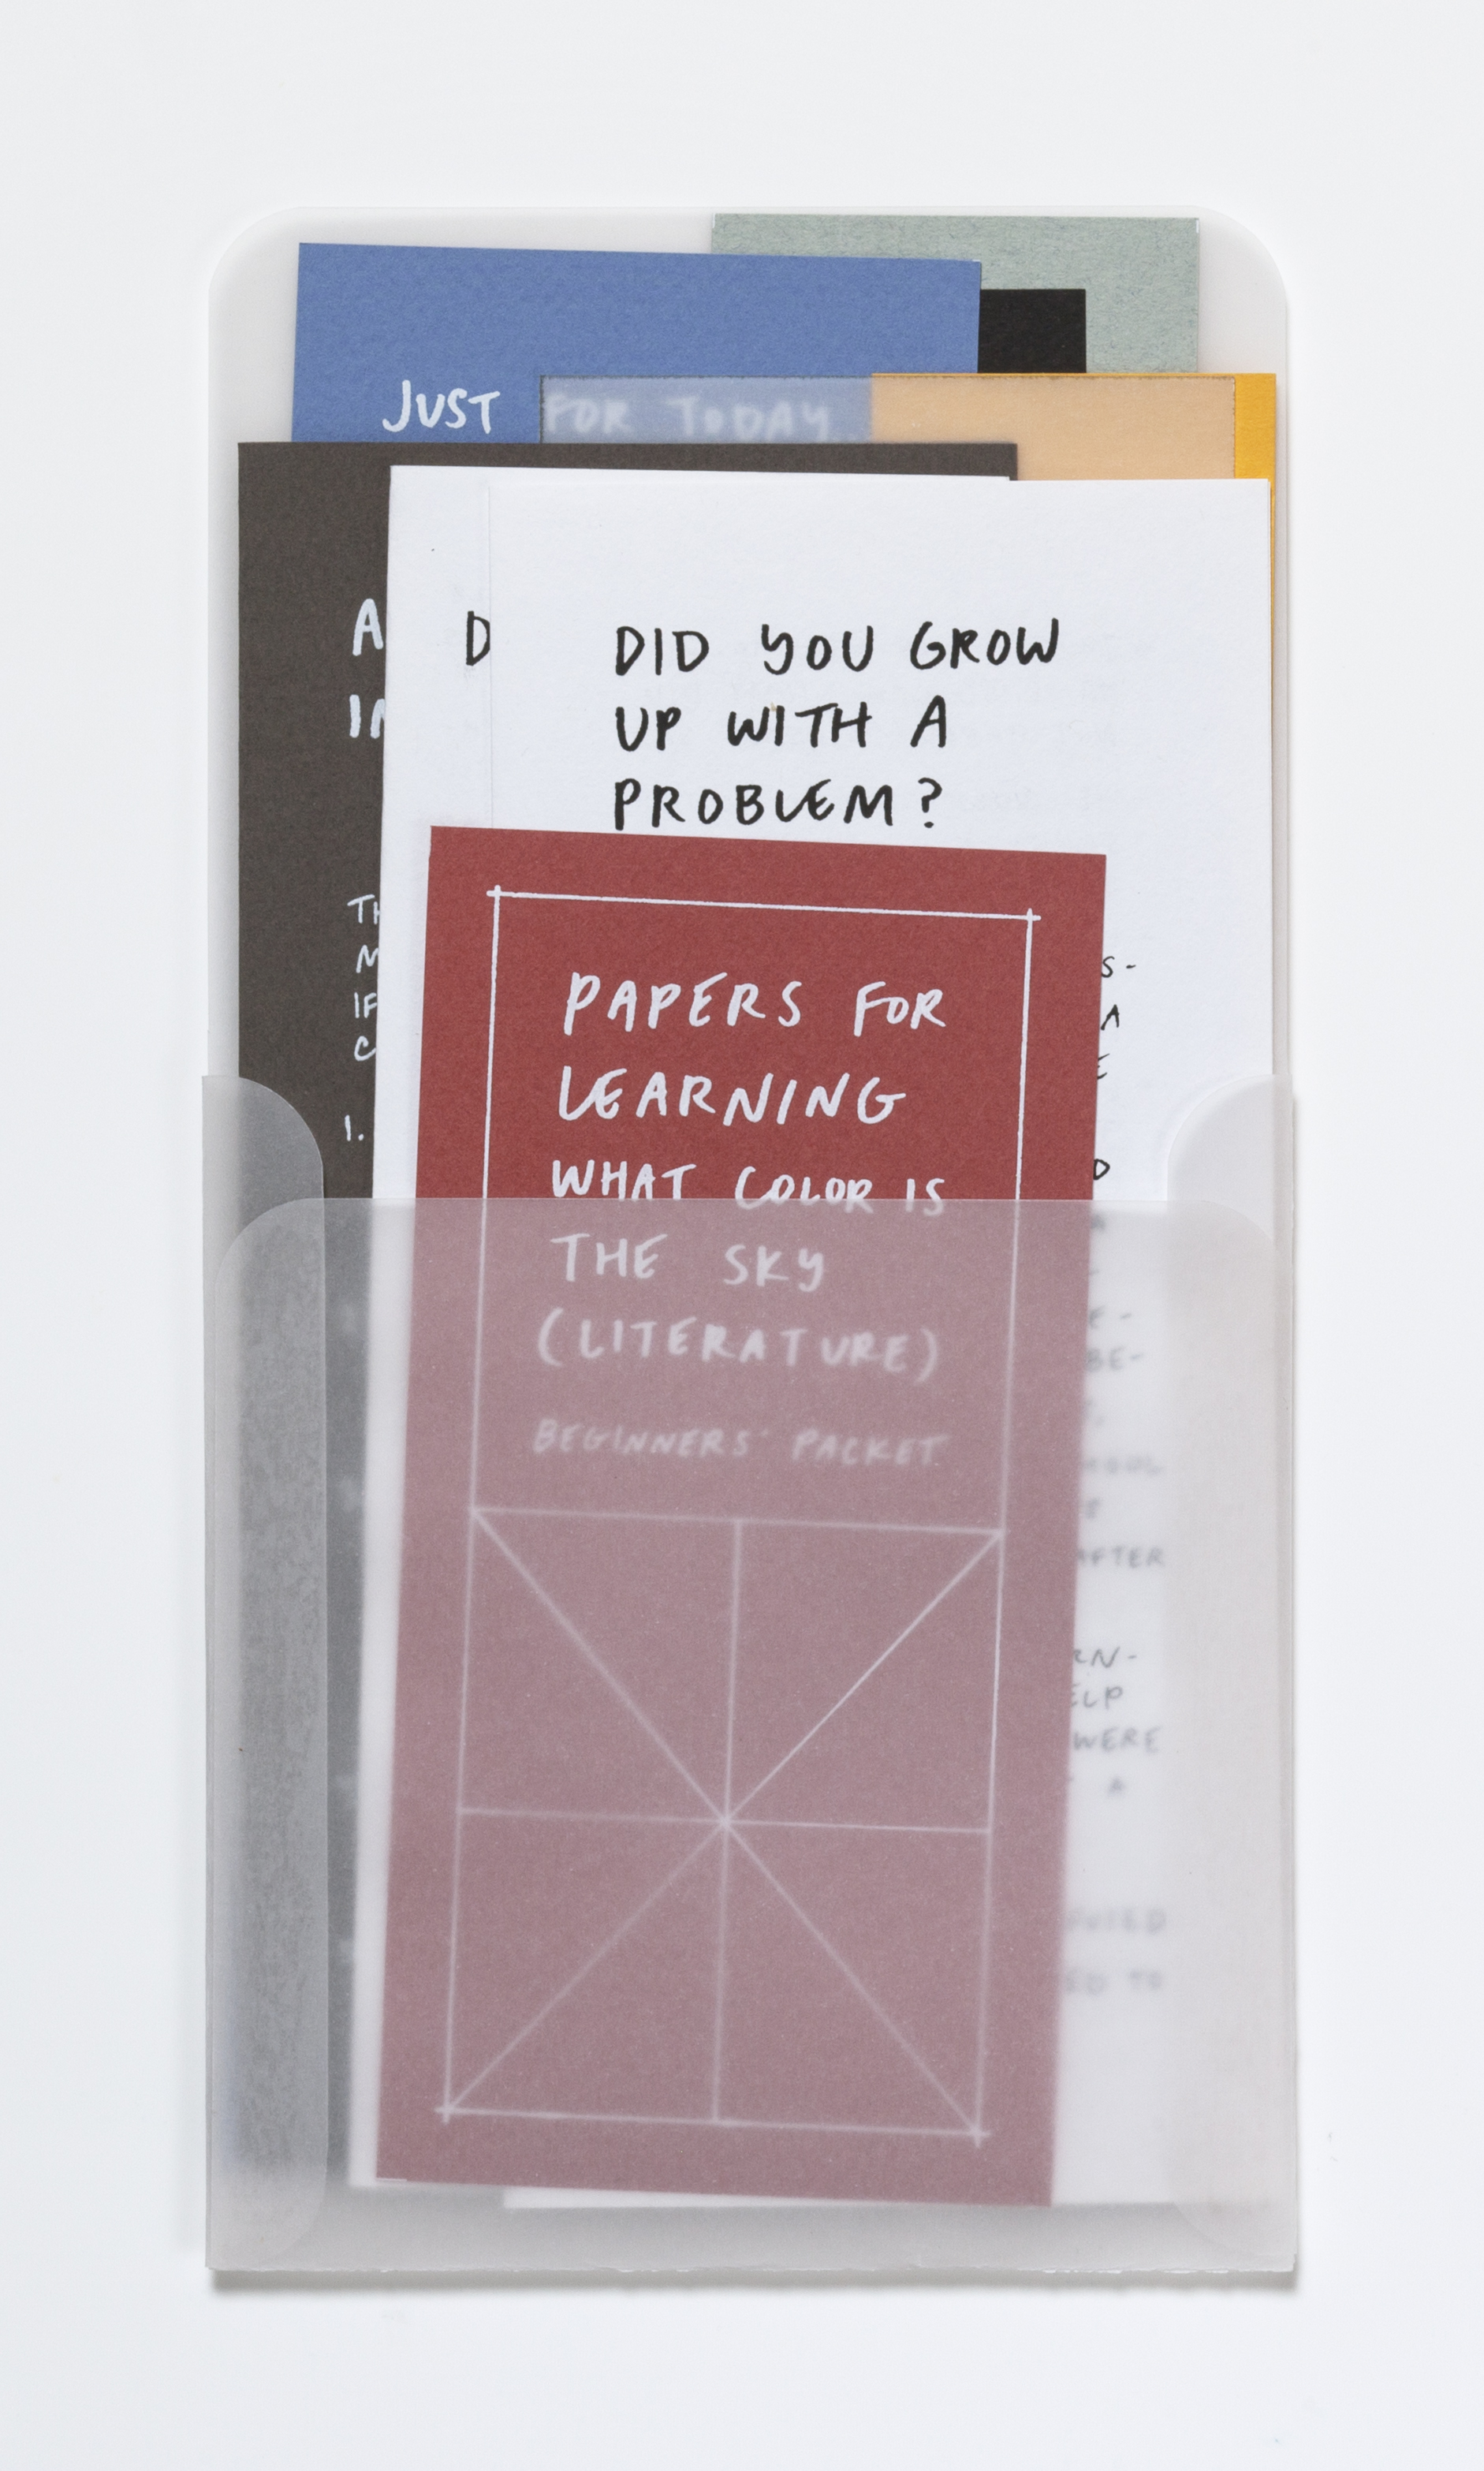    Papers for Learning What Color Is the Sky (Literature): Beginners’ Packet,  2018  Silkscreen and inkjet prints on paper Packet: 9 5/8 x 5 inches with prints of variable dimensions 